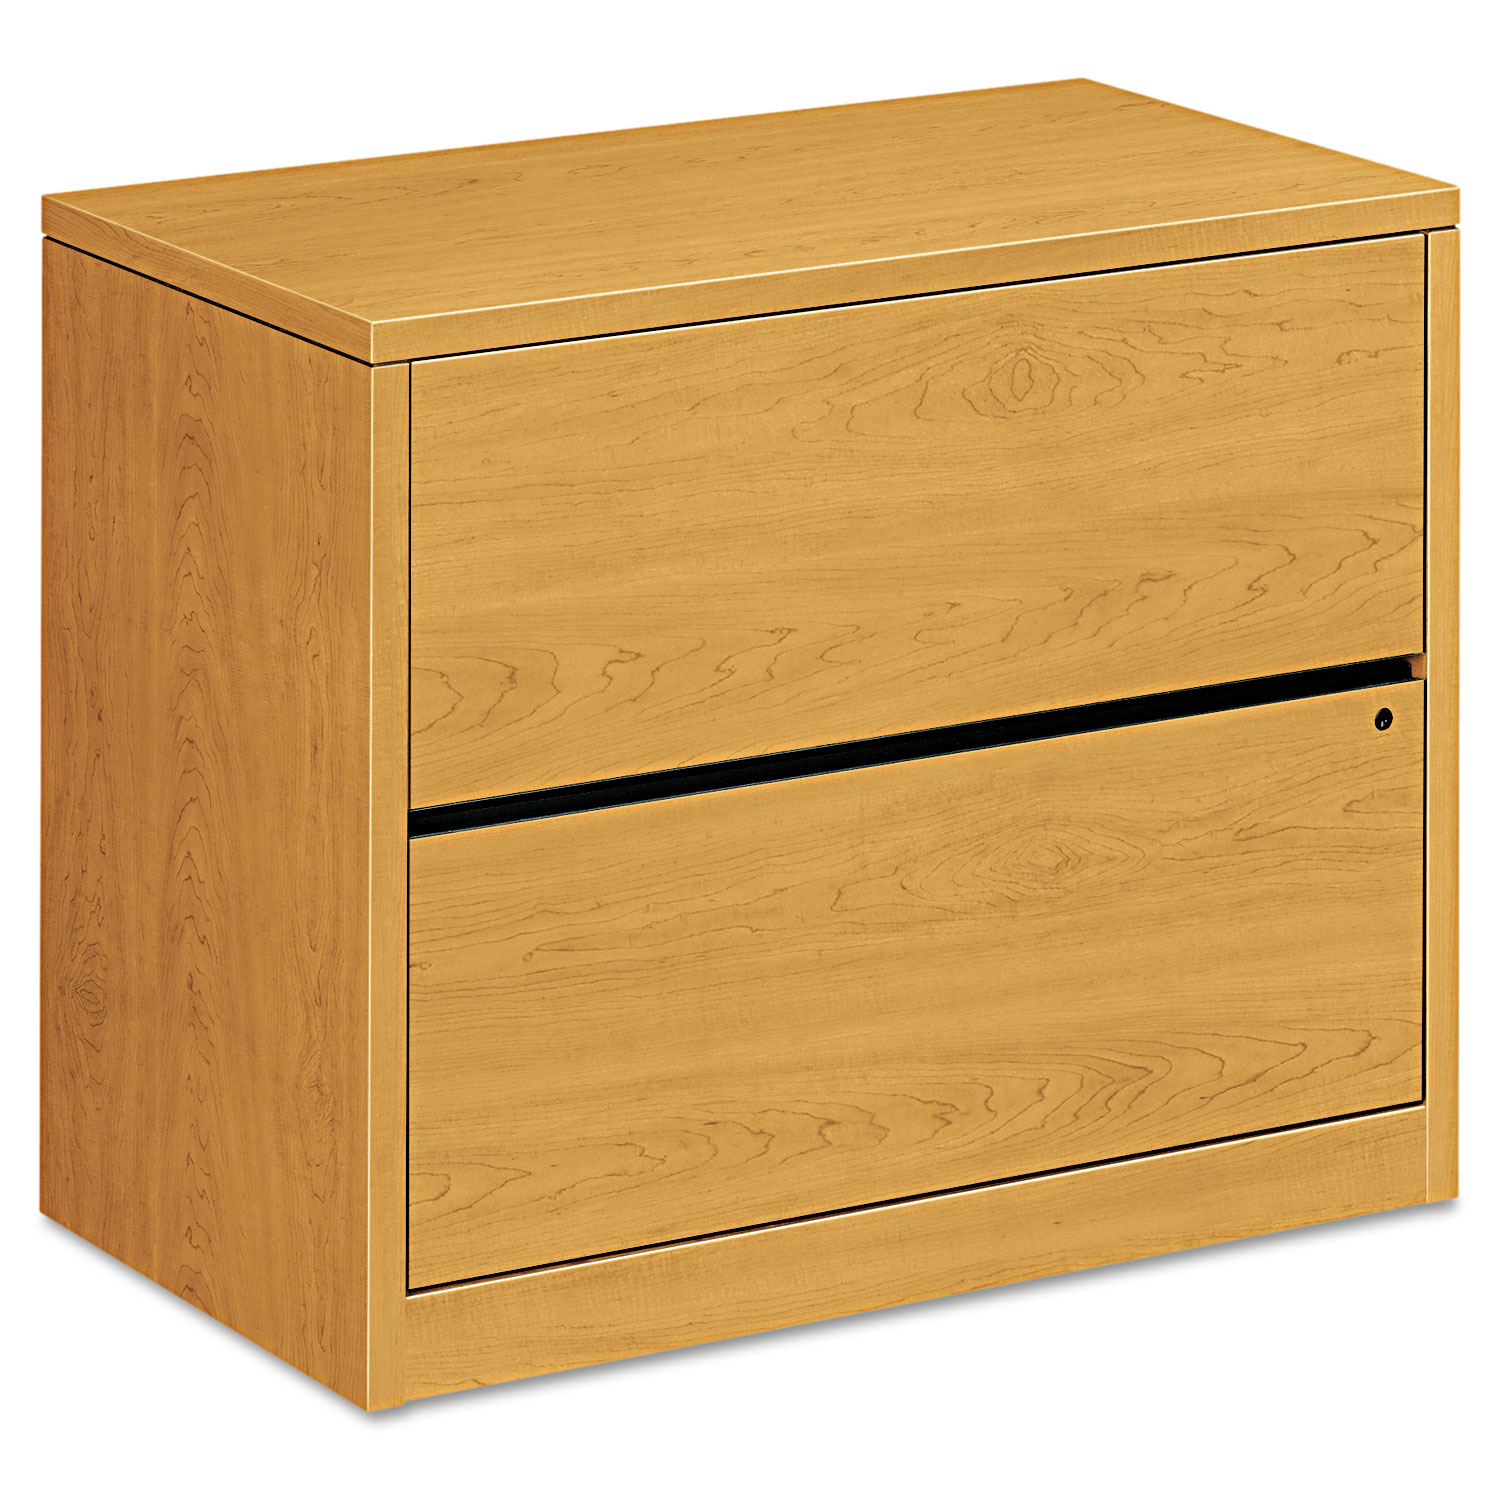 HON 10500 Series Two-Drawer Lateral File, 36w x 20d x 29-1/2h, Harvest